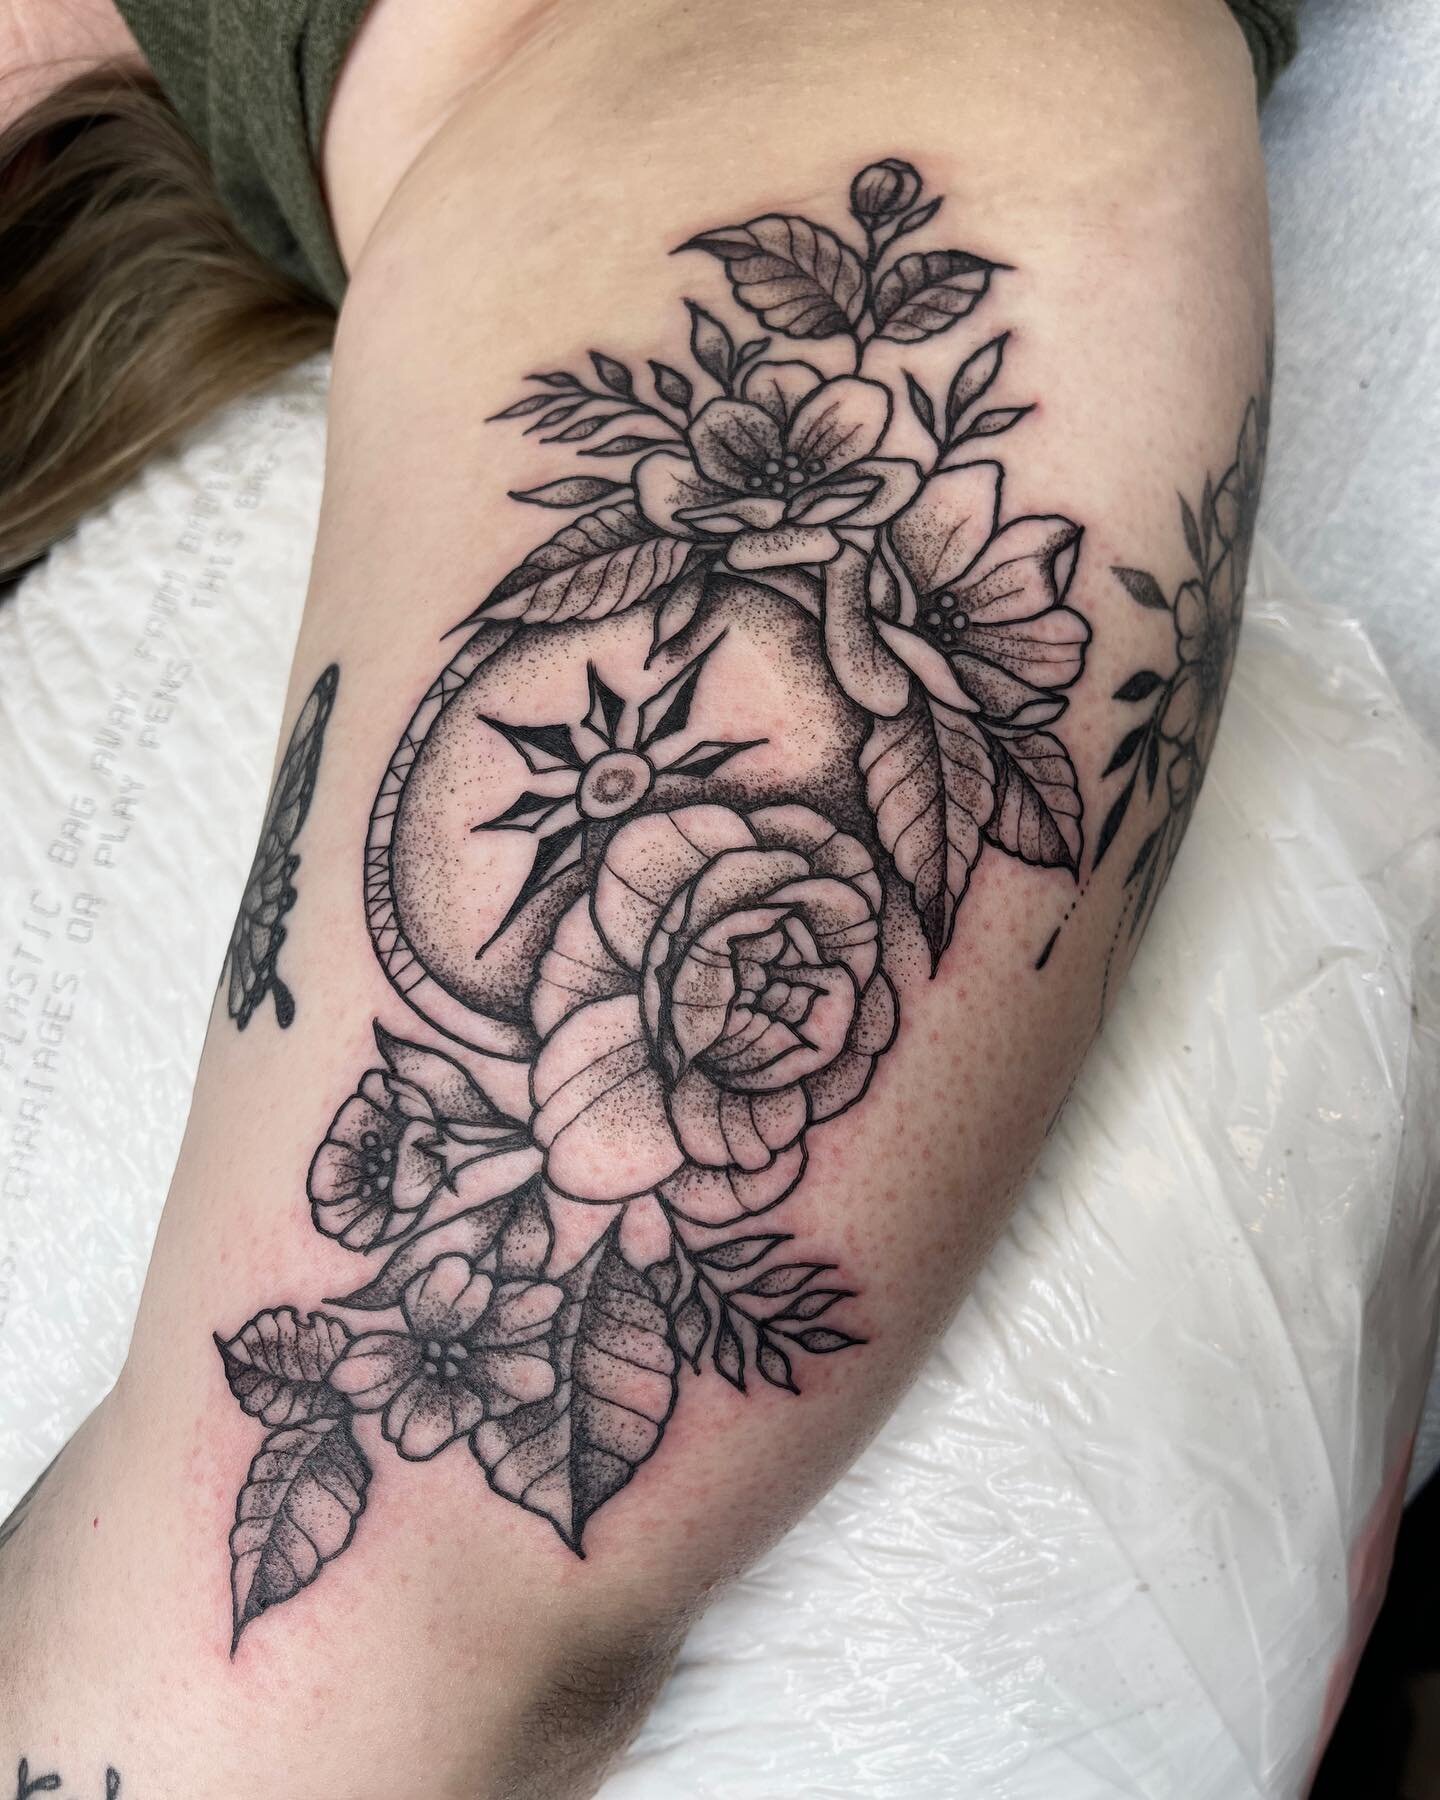 Stipple shaded flowers and compass by @emilycolgantattoos! Give her a follow and DM her to book an appointment.

#stippletattoo #stippled #stippledtattoo #blackandgreytattoo #flowertattoo #compasstattoo #tattoo #tattooideas #tattooartist #junipermoon